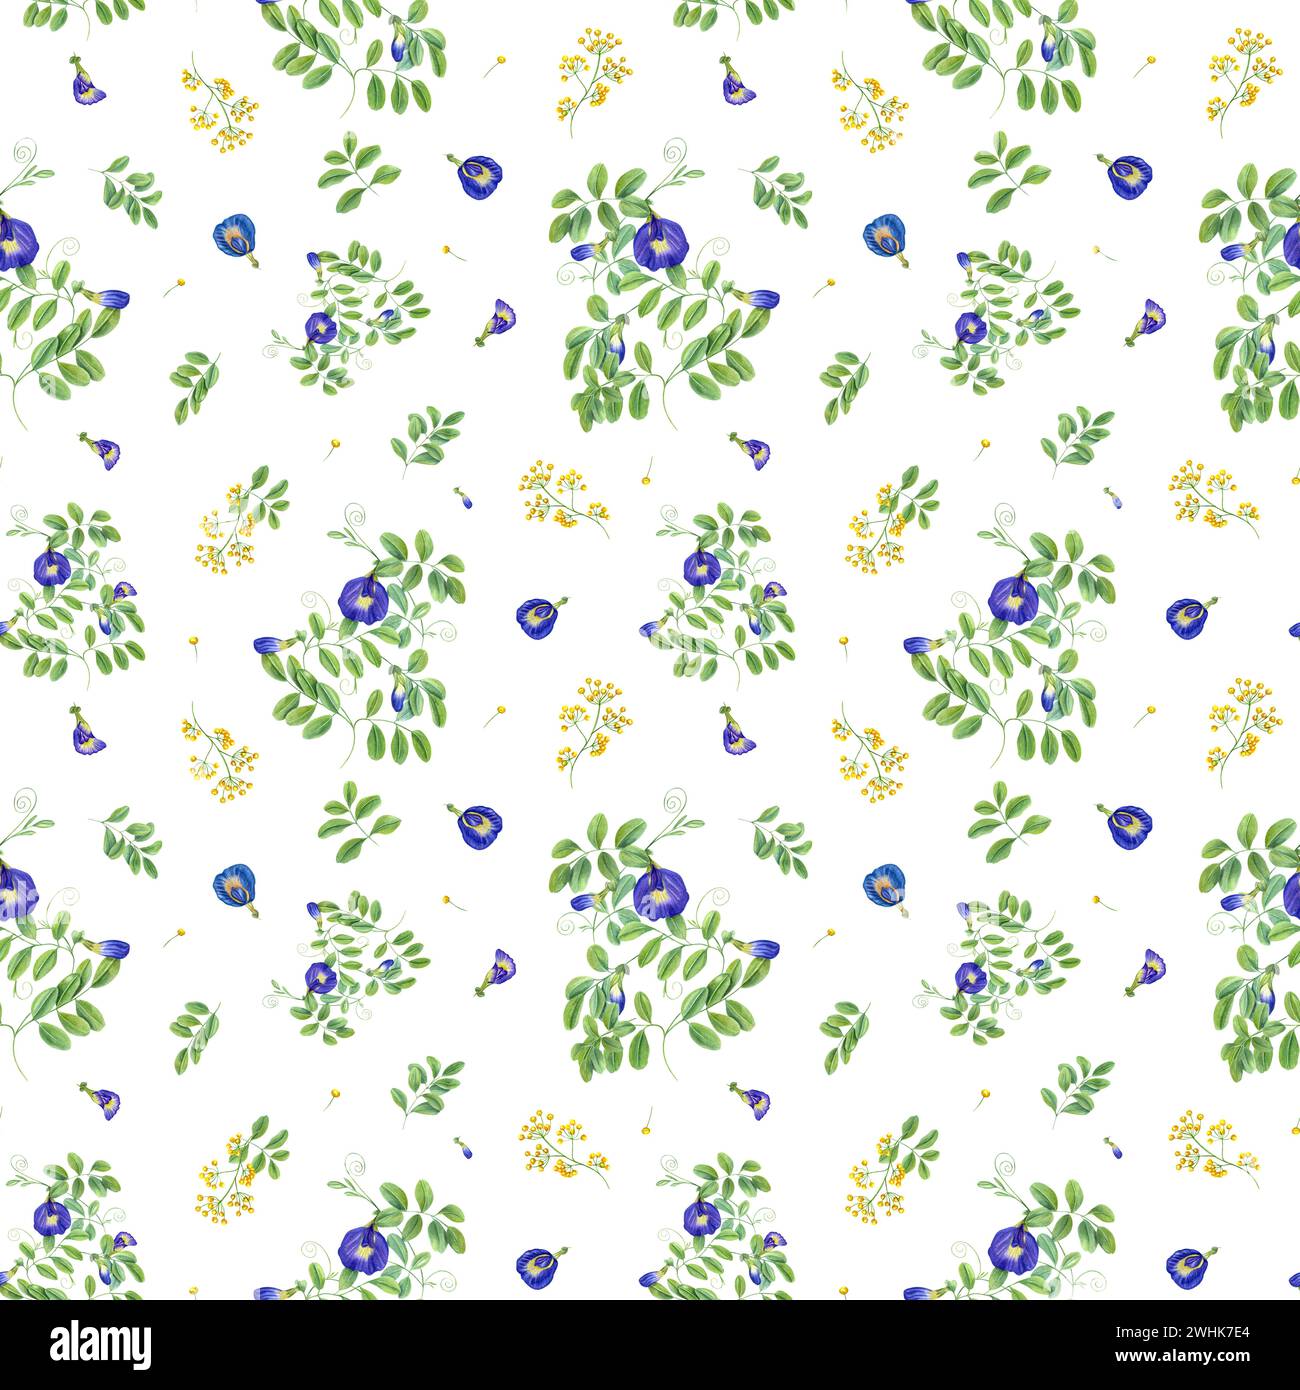 Blue and yellow flowers with green leaves. Seamless pattern of Thai flowers. Butterfly pea flowers. Tropical plant, Ipomoea, clitoria ternatea Stock Photo